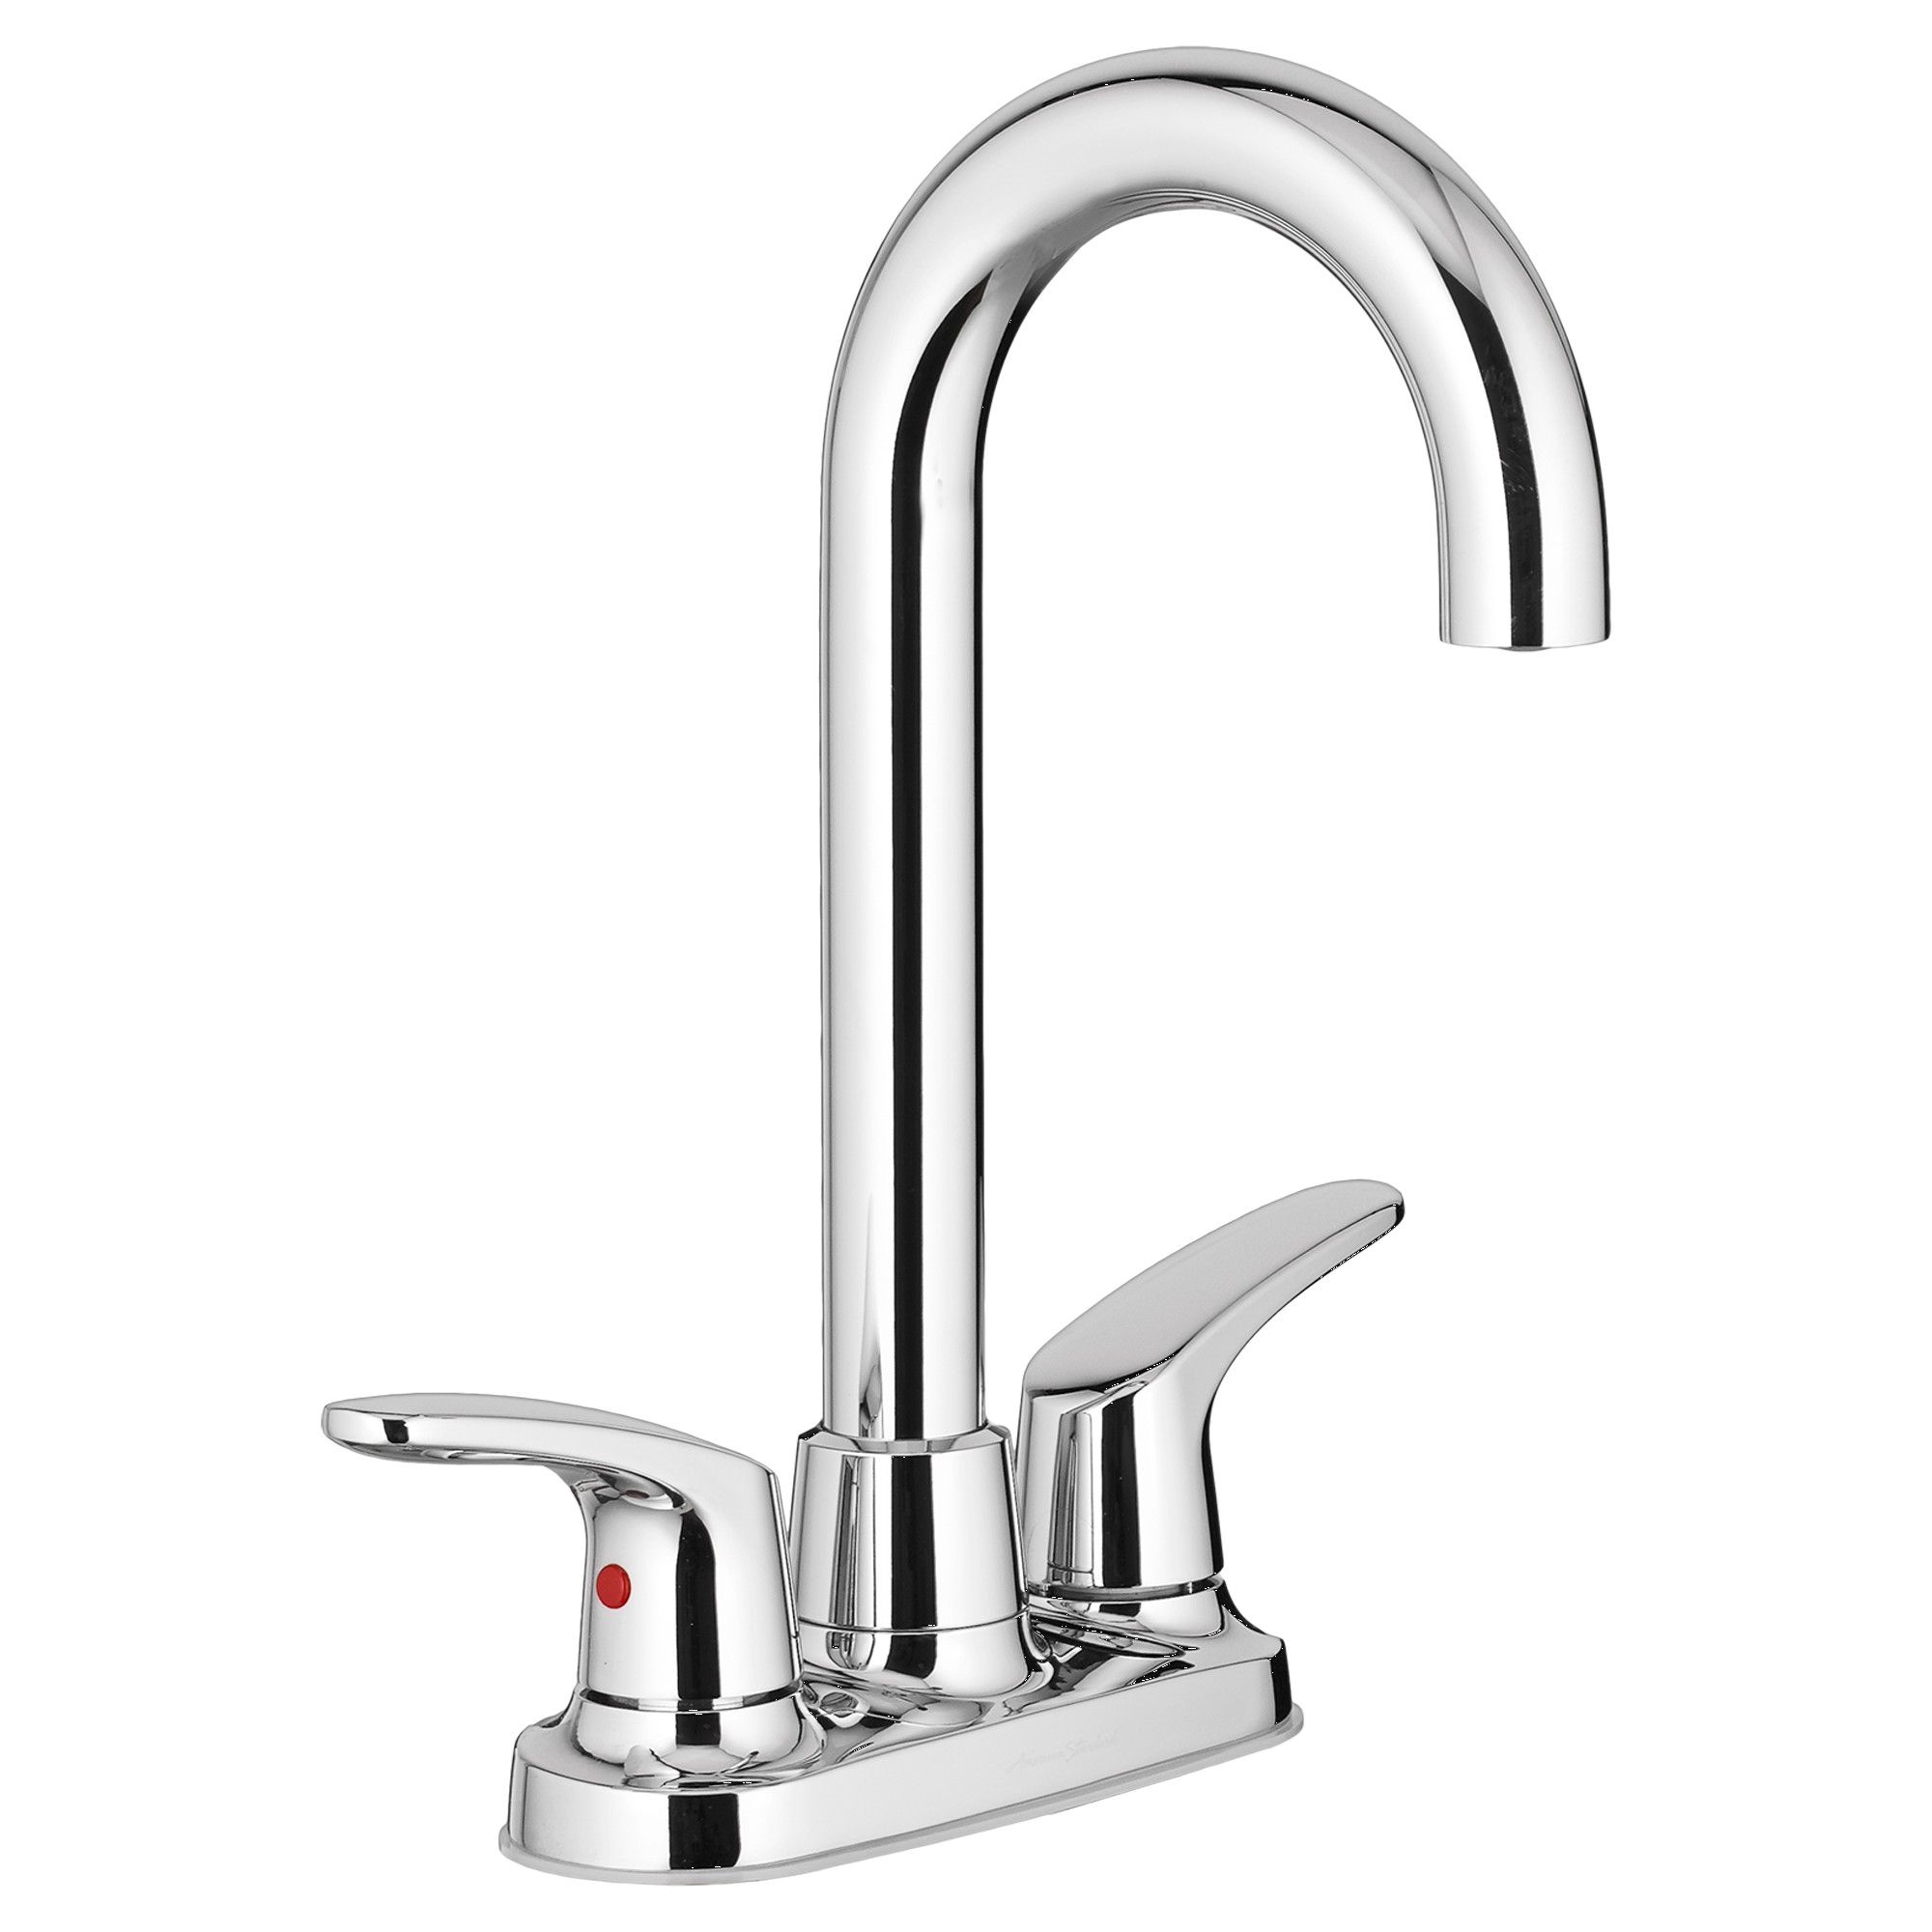 American Standard | 7074.400.002 | AMERICAN STANDARD 7074.400 COLONY PRO 2HANDLE BAR SINK FAUCET CP 002 CHROME